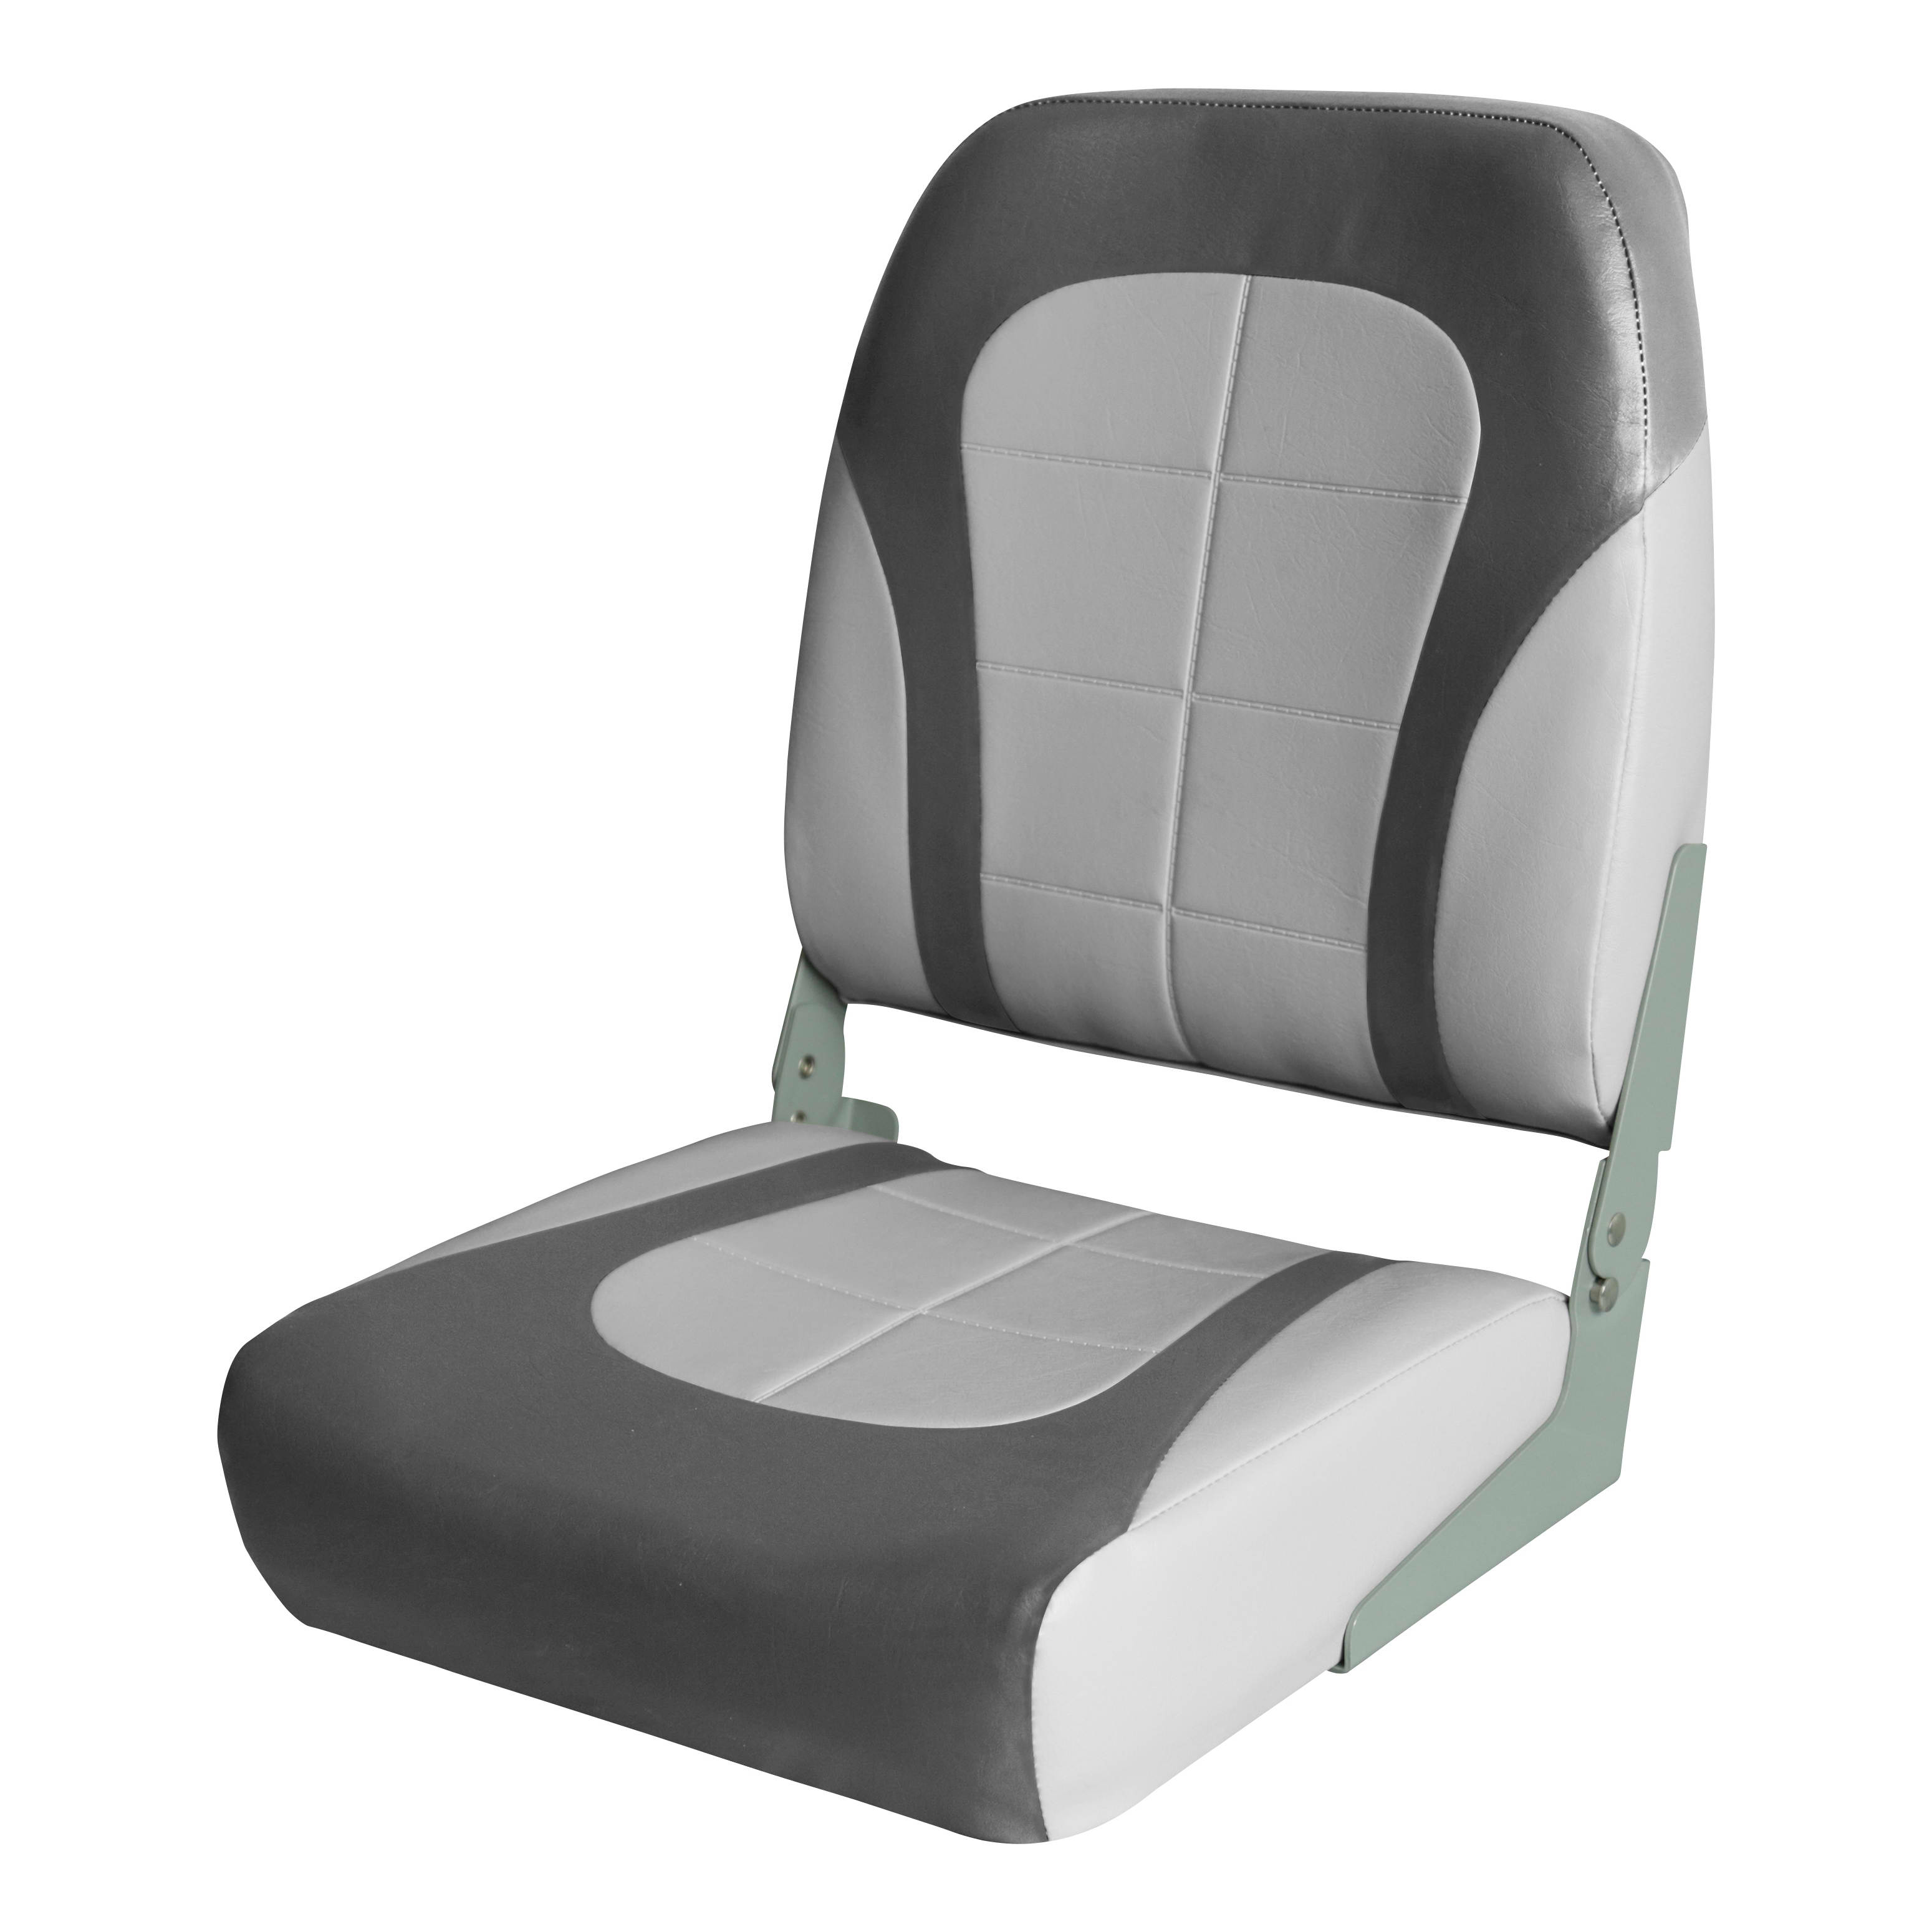 Boat Fixed Seat Pedestal - Sturdy & Reliable Support